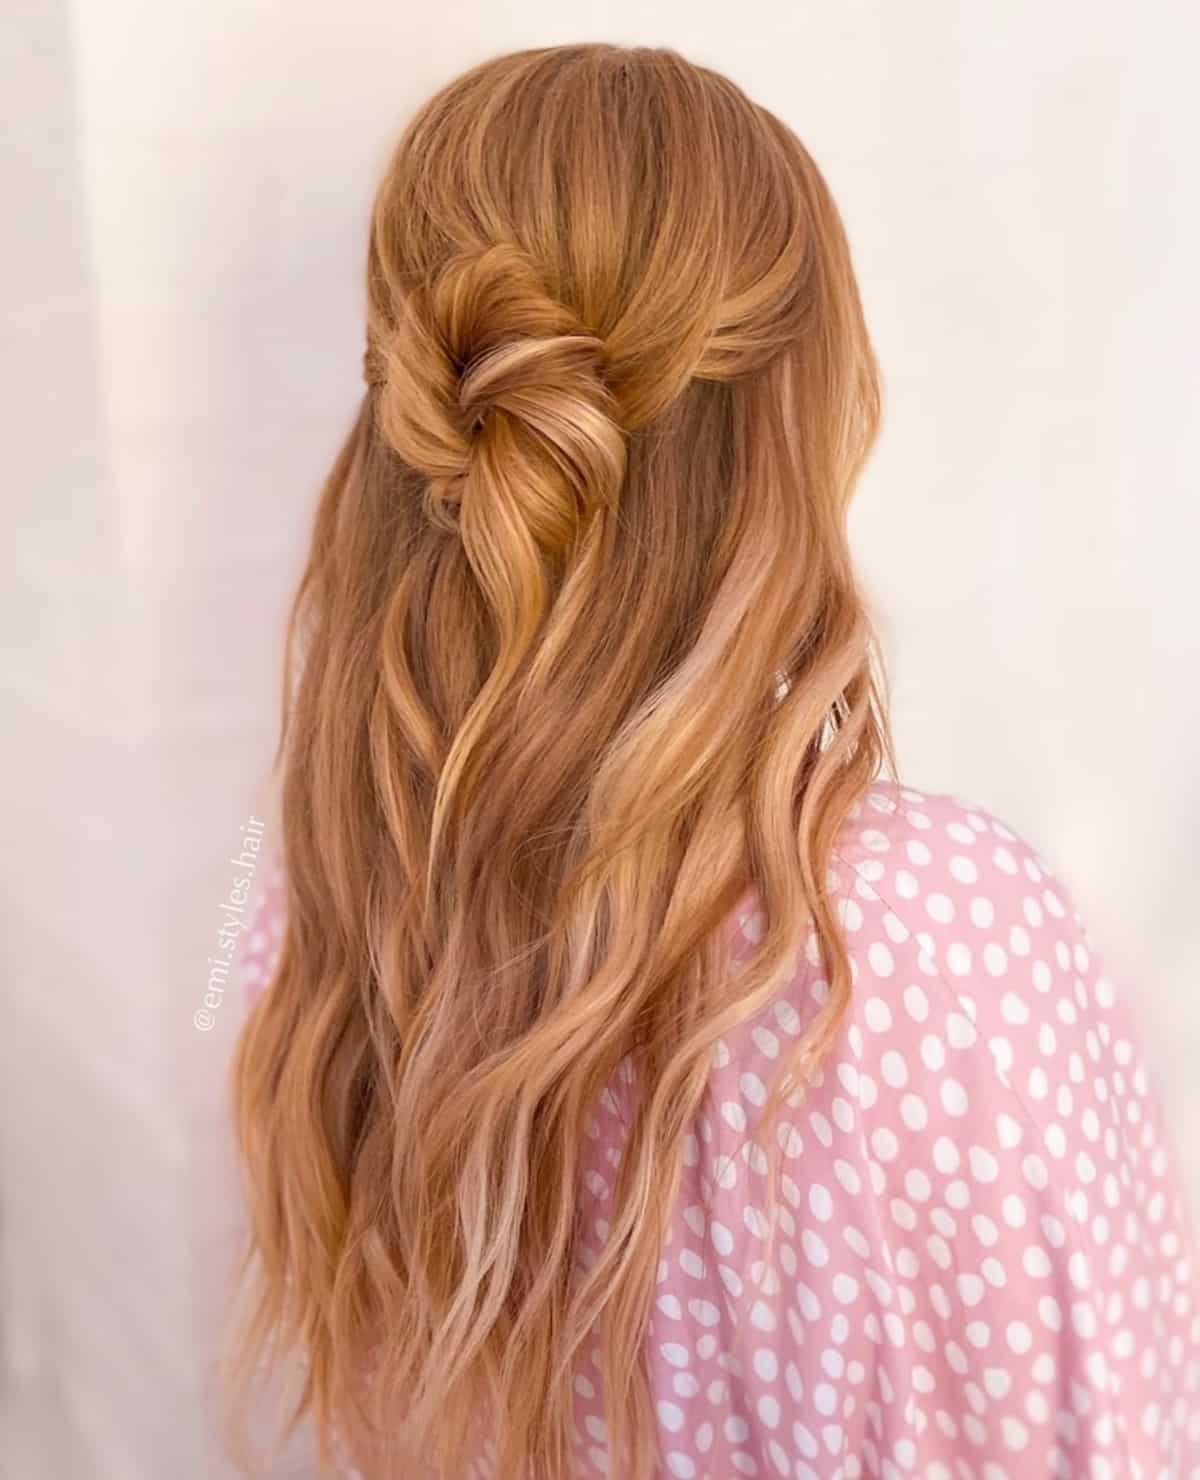 Long and Simple Half-Up, Half-Down Hairstyle